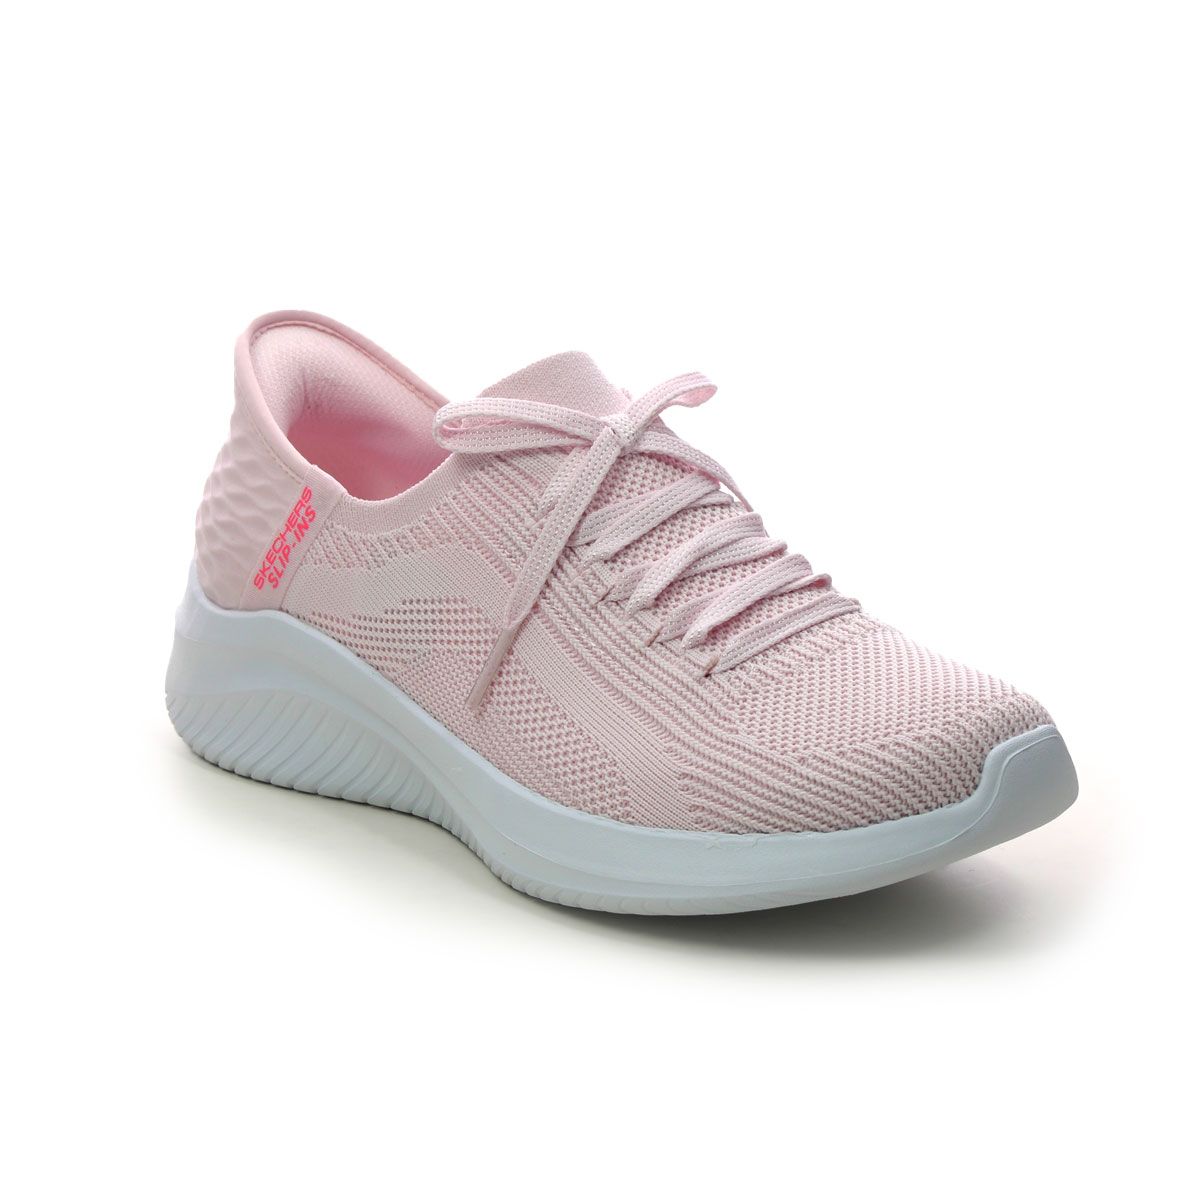 Skechers Slip Ins Ultra LTPK Light pink Womens trainers 149710 in a Plain Textile in Size 4